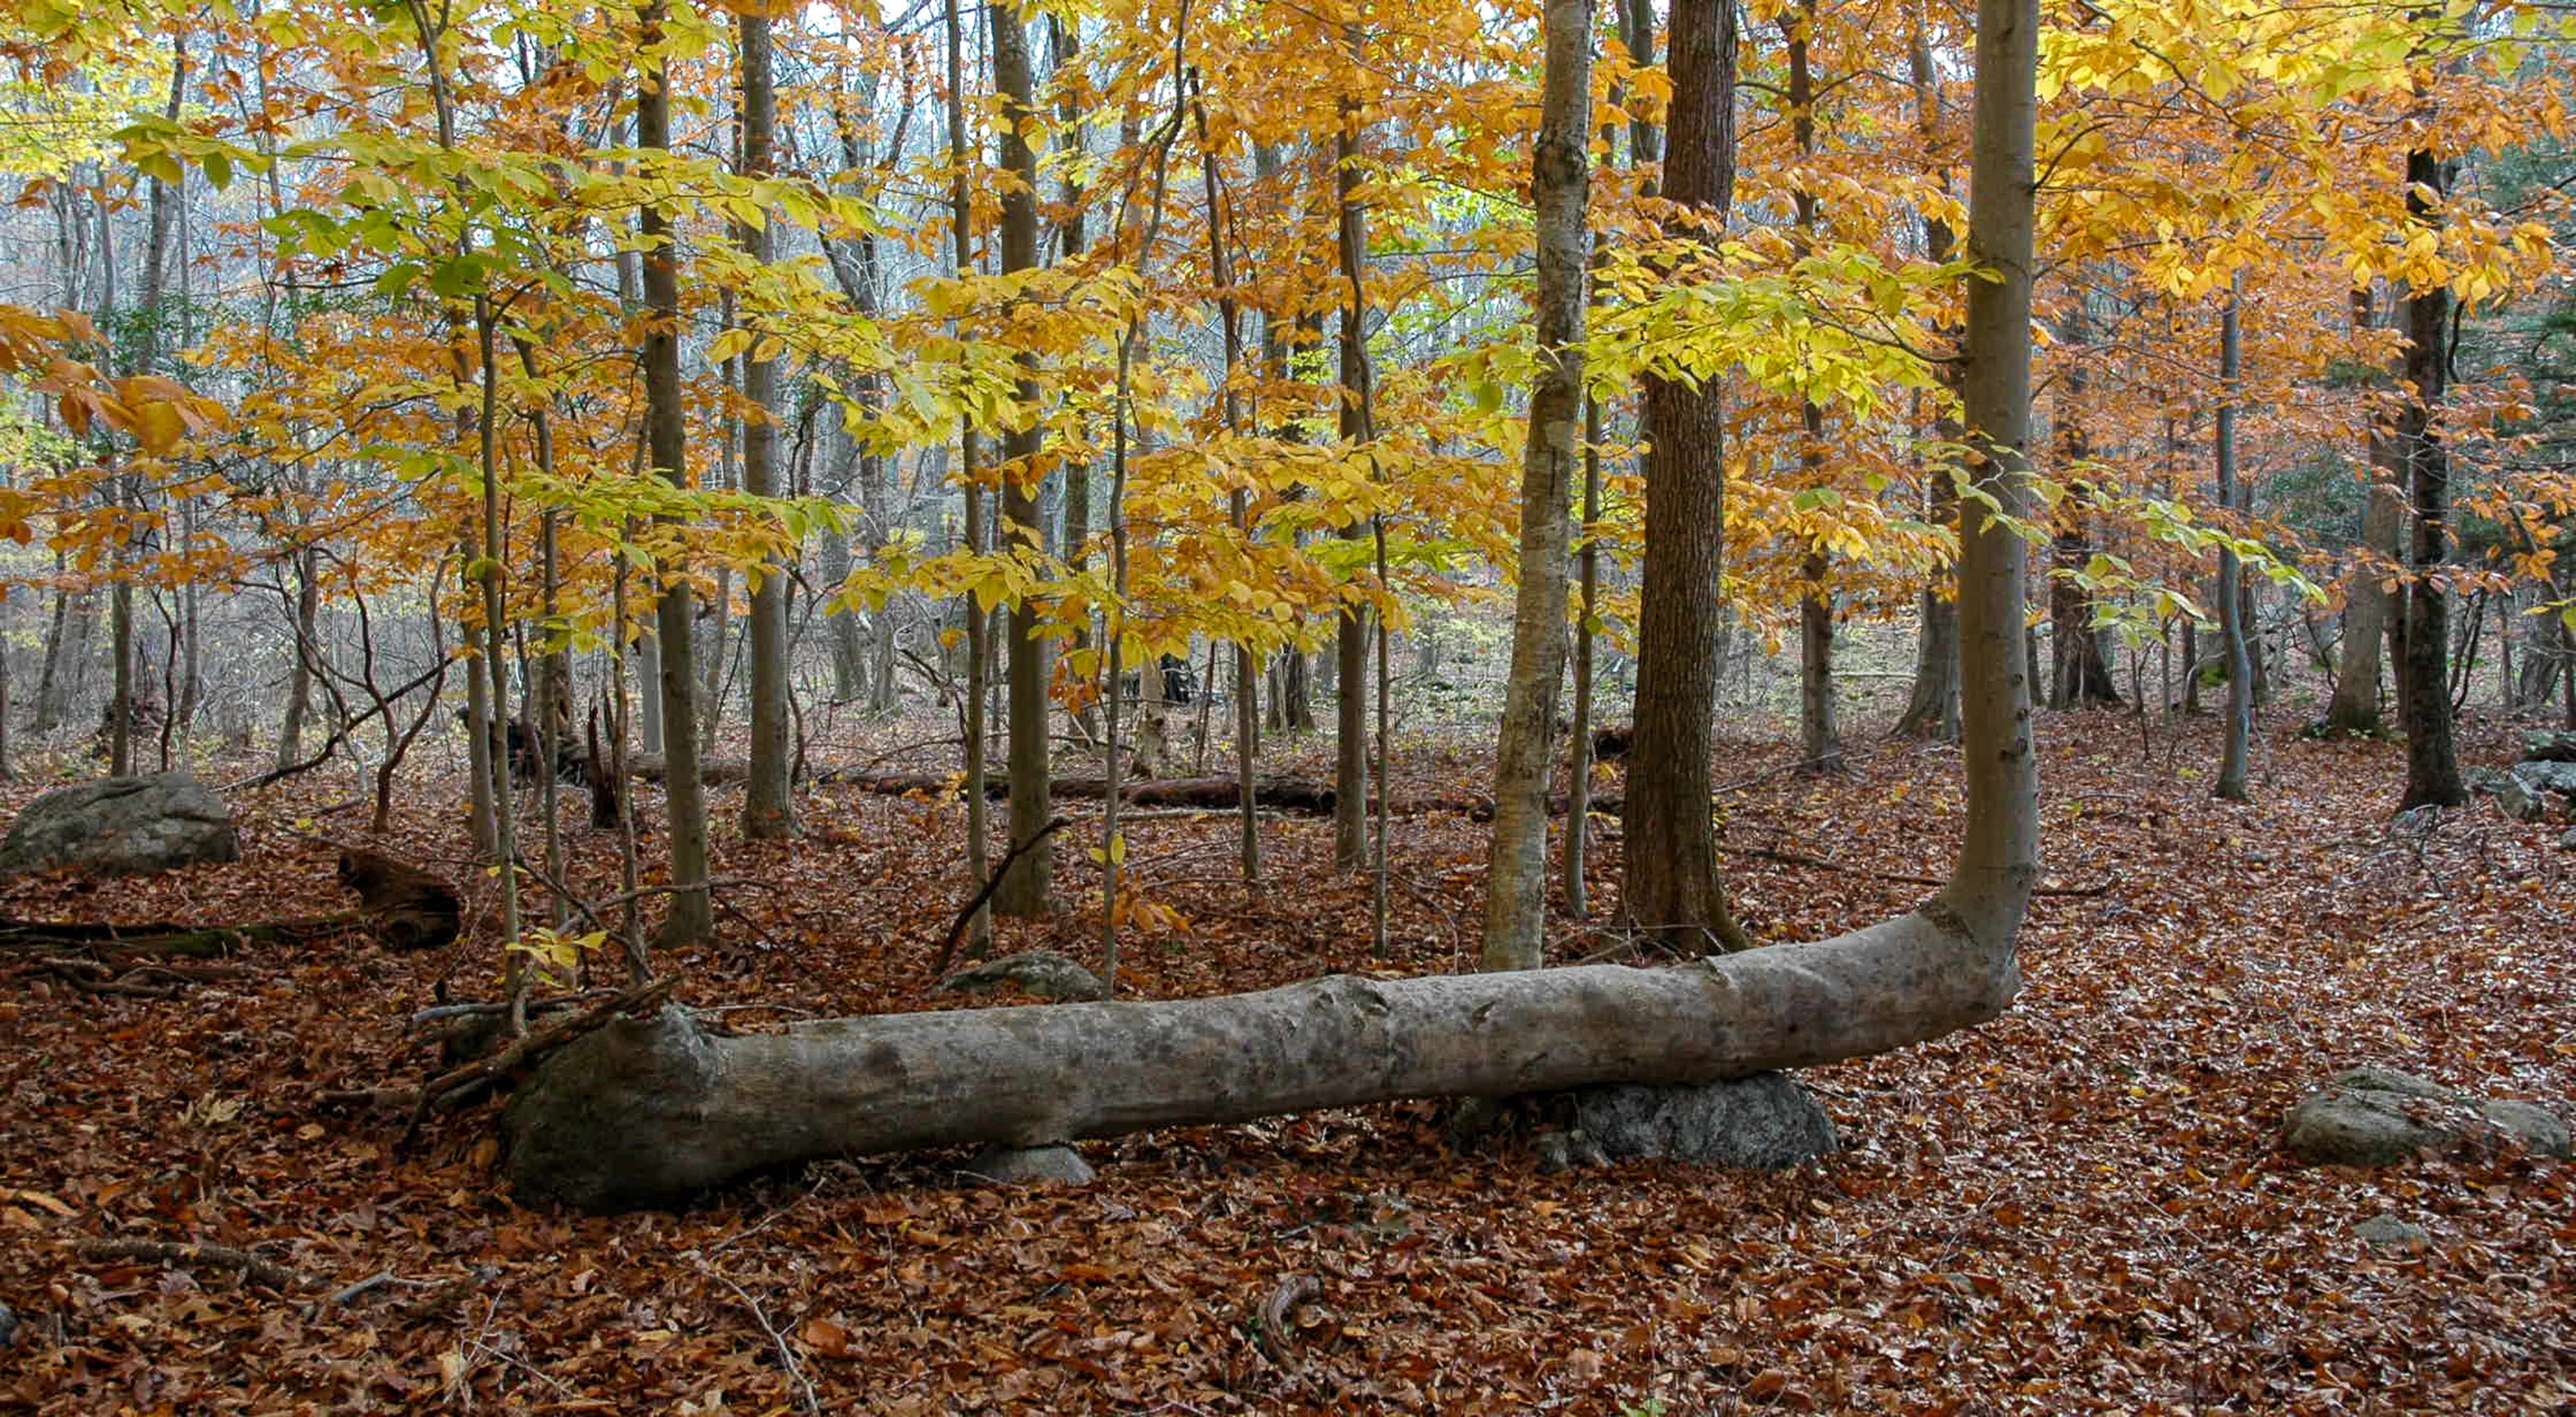 Burnham Brook Preserve is home to a wide variety of oaks, hickory, beech, birch, maple, and conifers.